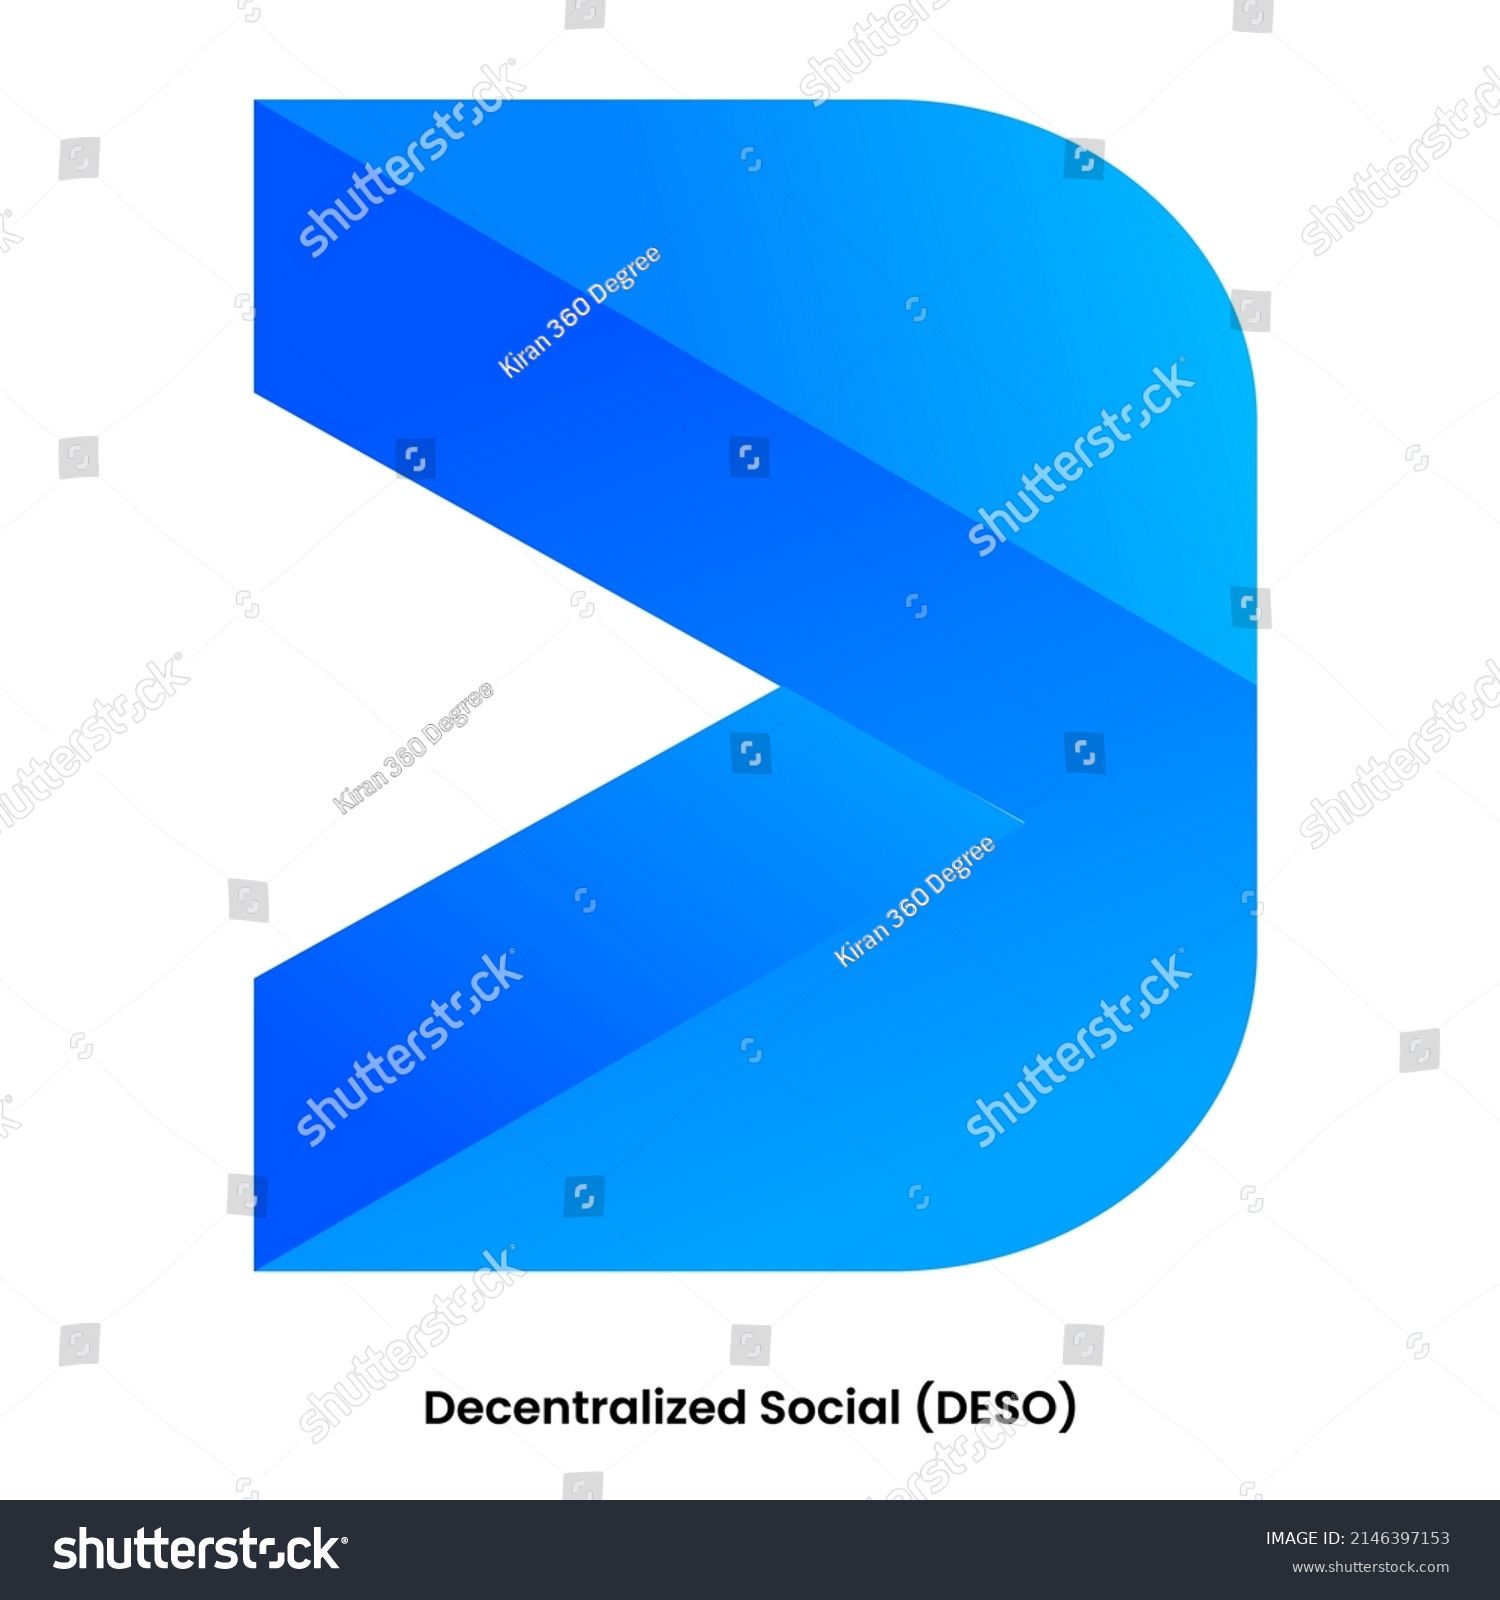 SVG of Decentralized Social crypto currency with symbol DESO. Crypto logo vector illustration for stickers, icon, badges, labels and emblem designs. svg